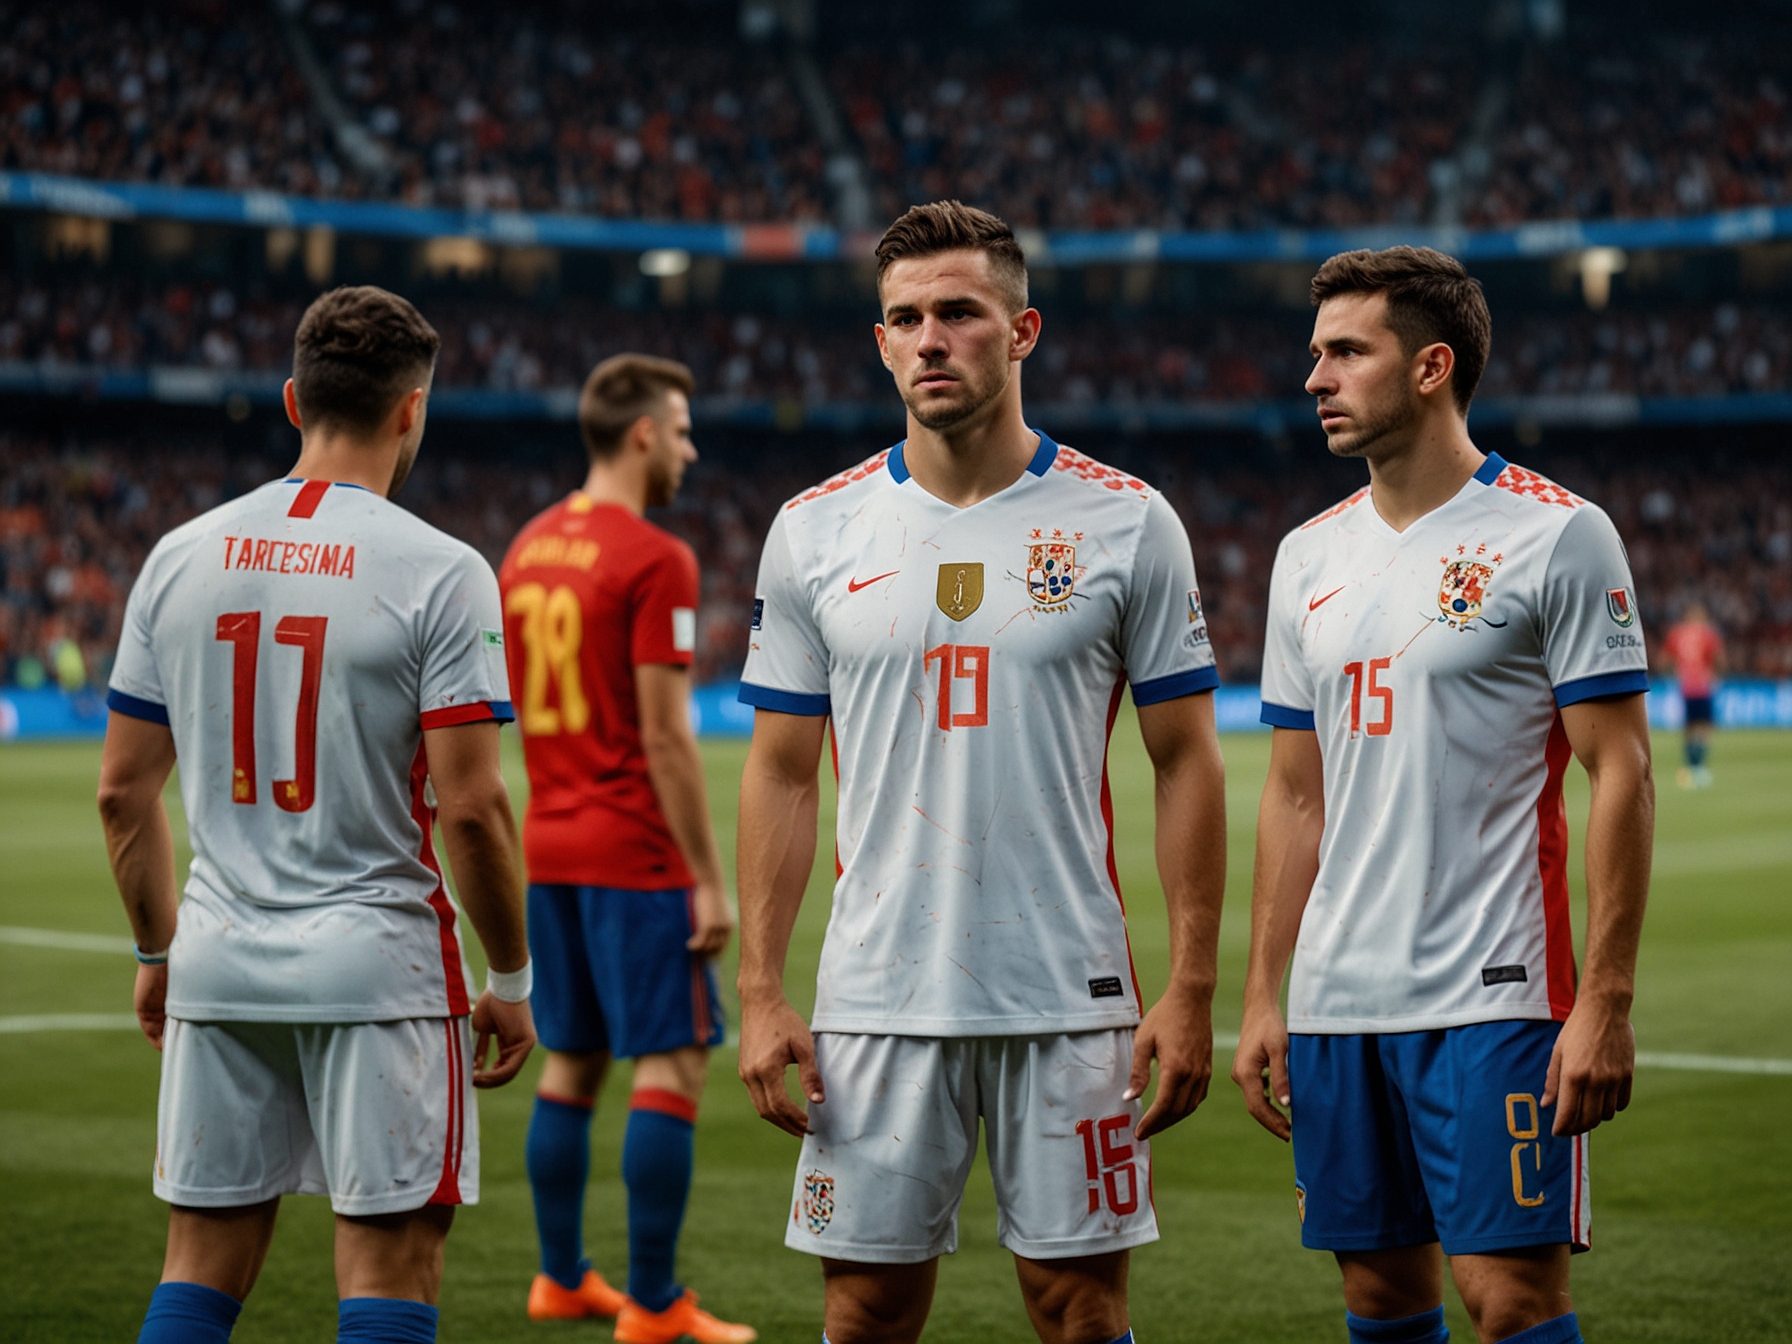 Croatian players looking dejected on the field as Spain takes control and secures a 3-0 victory in their Euro 2024 debut.